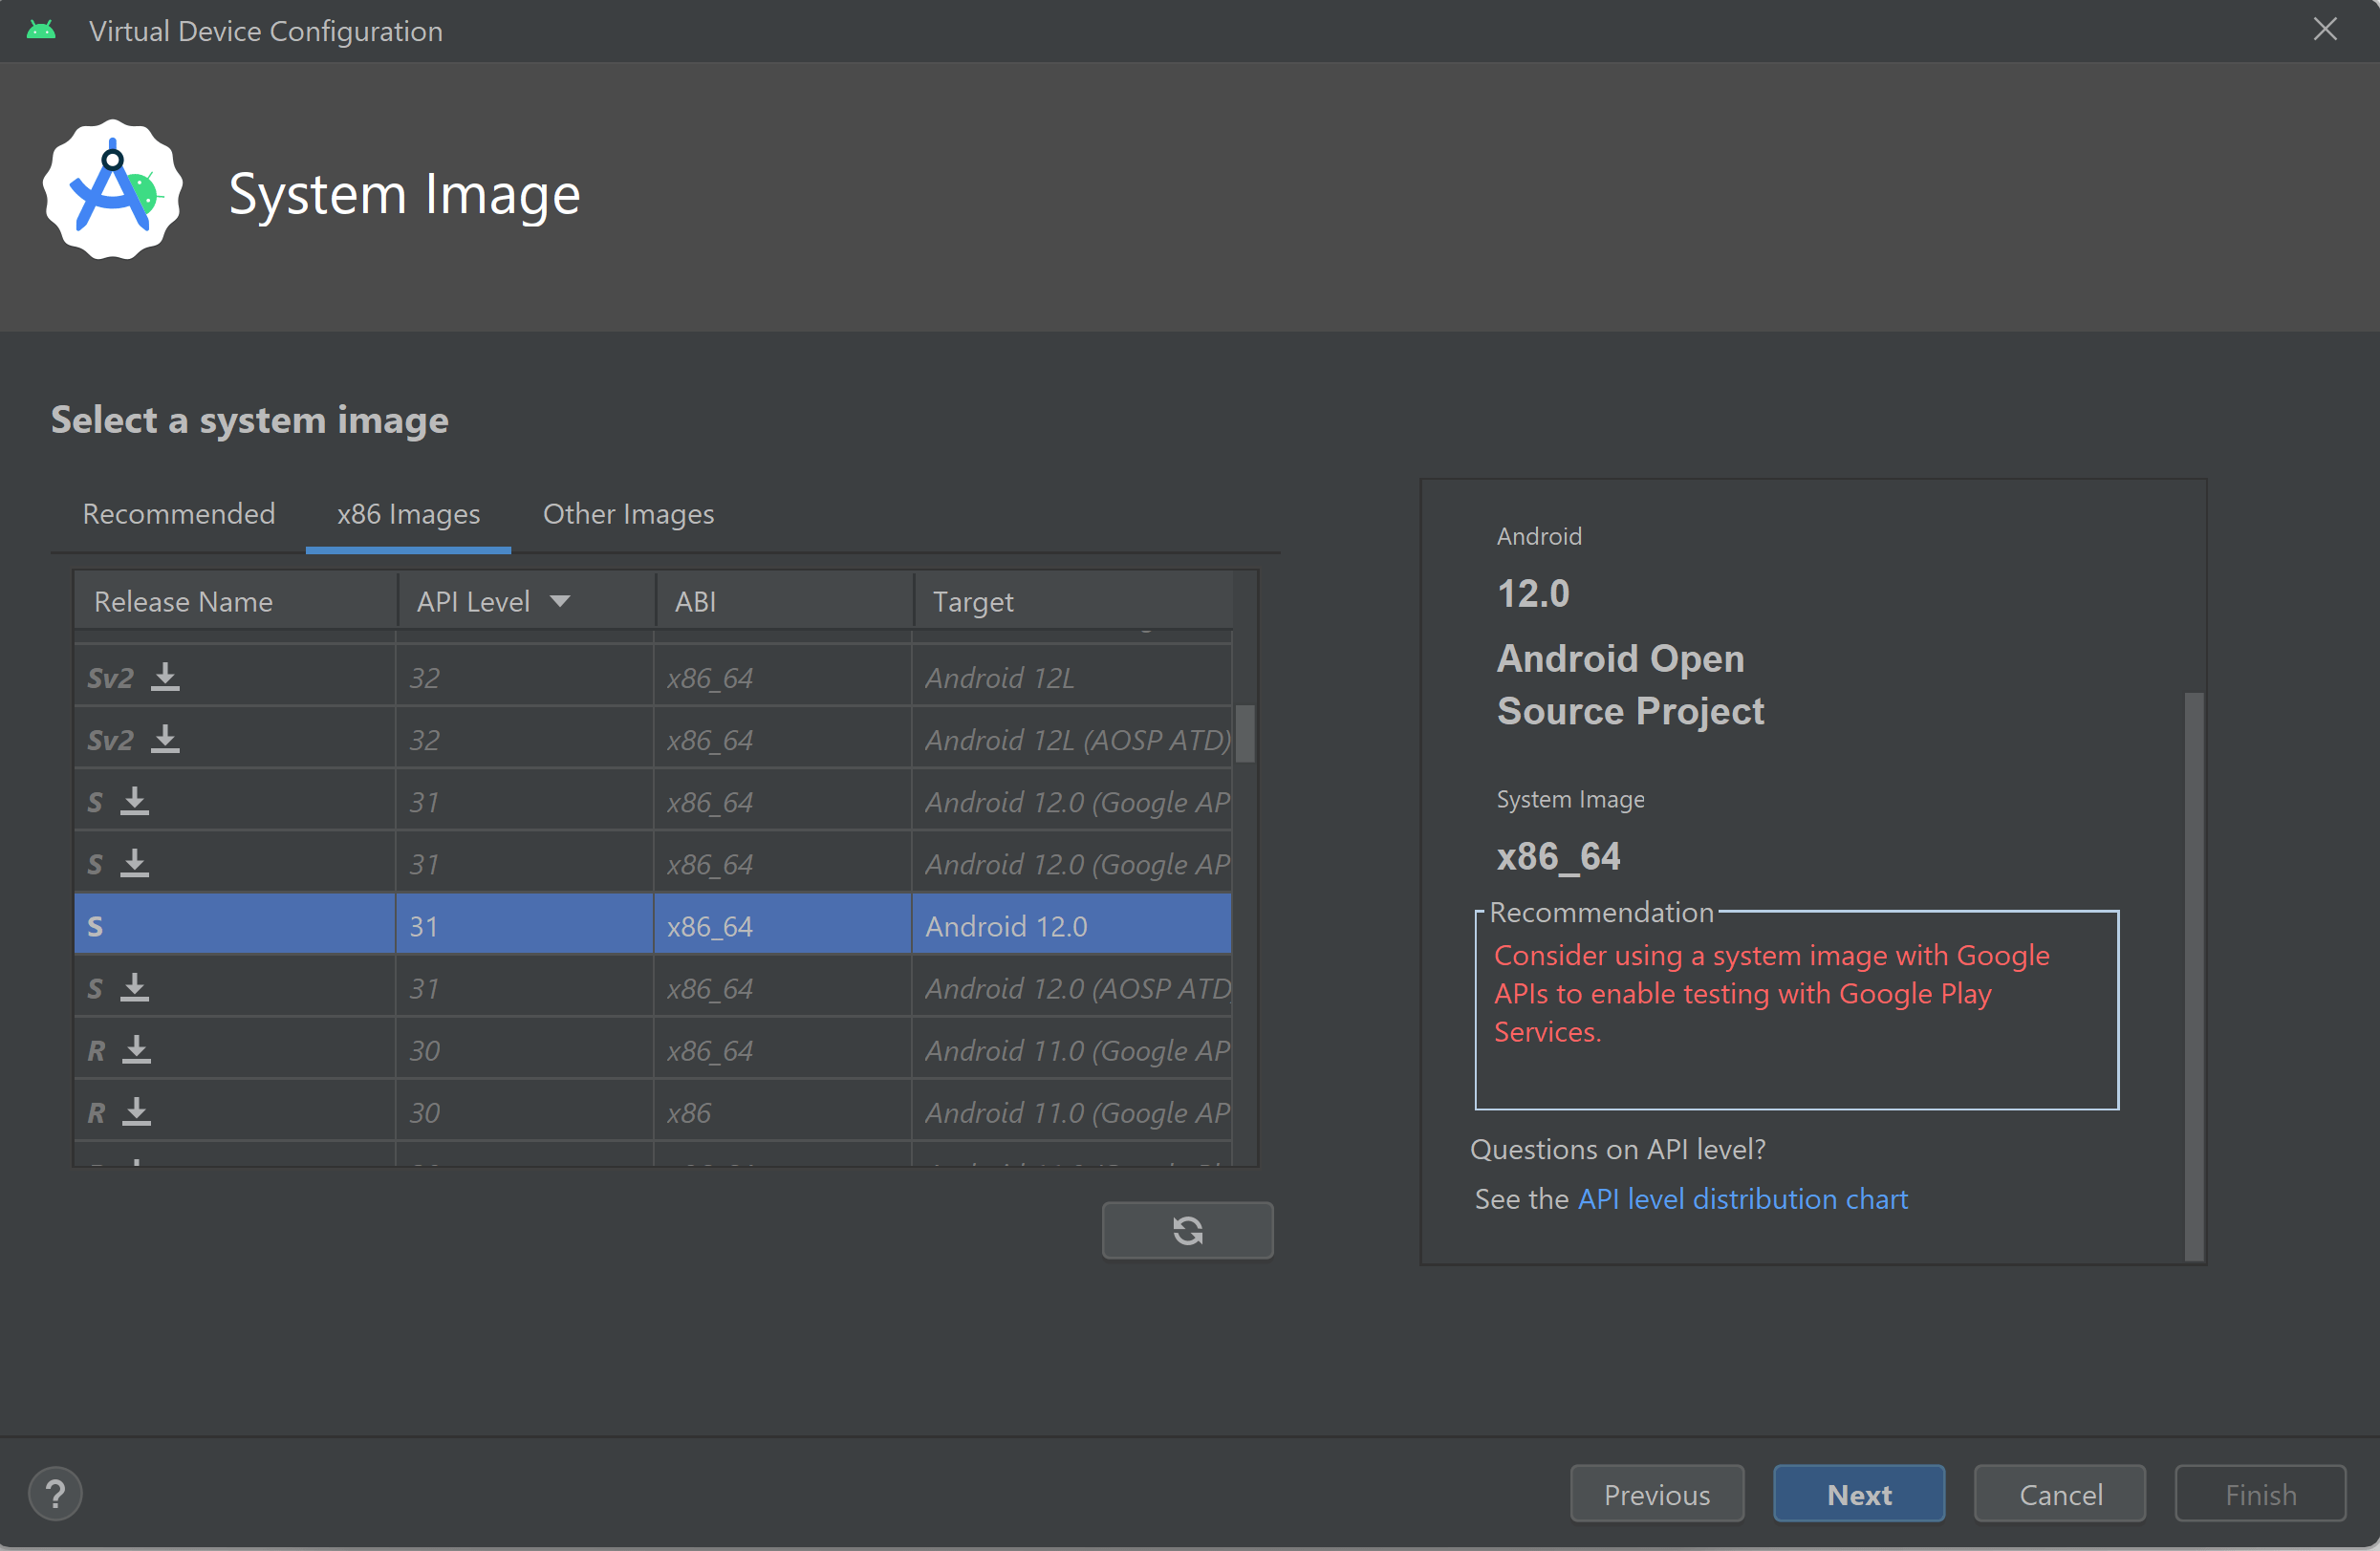 Screenshot of Android Studio with the start of creating a Virtual Device Configuration selecting the System Image for the Android Virtual Device